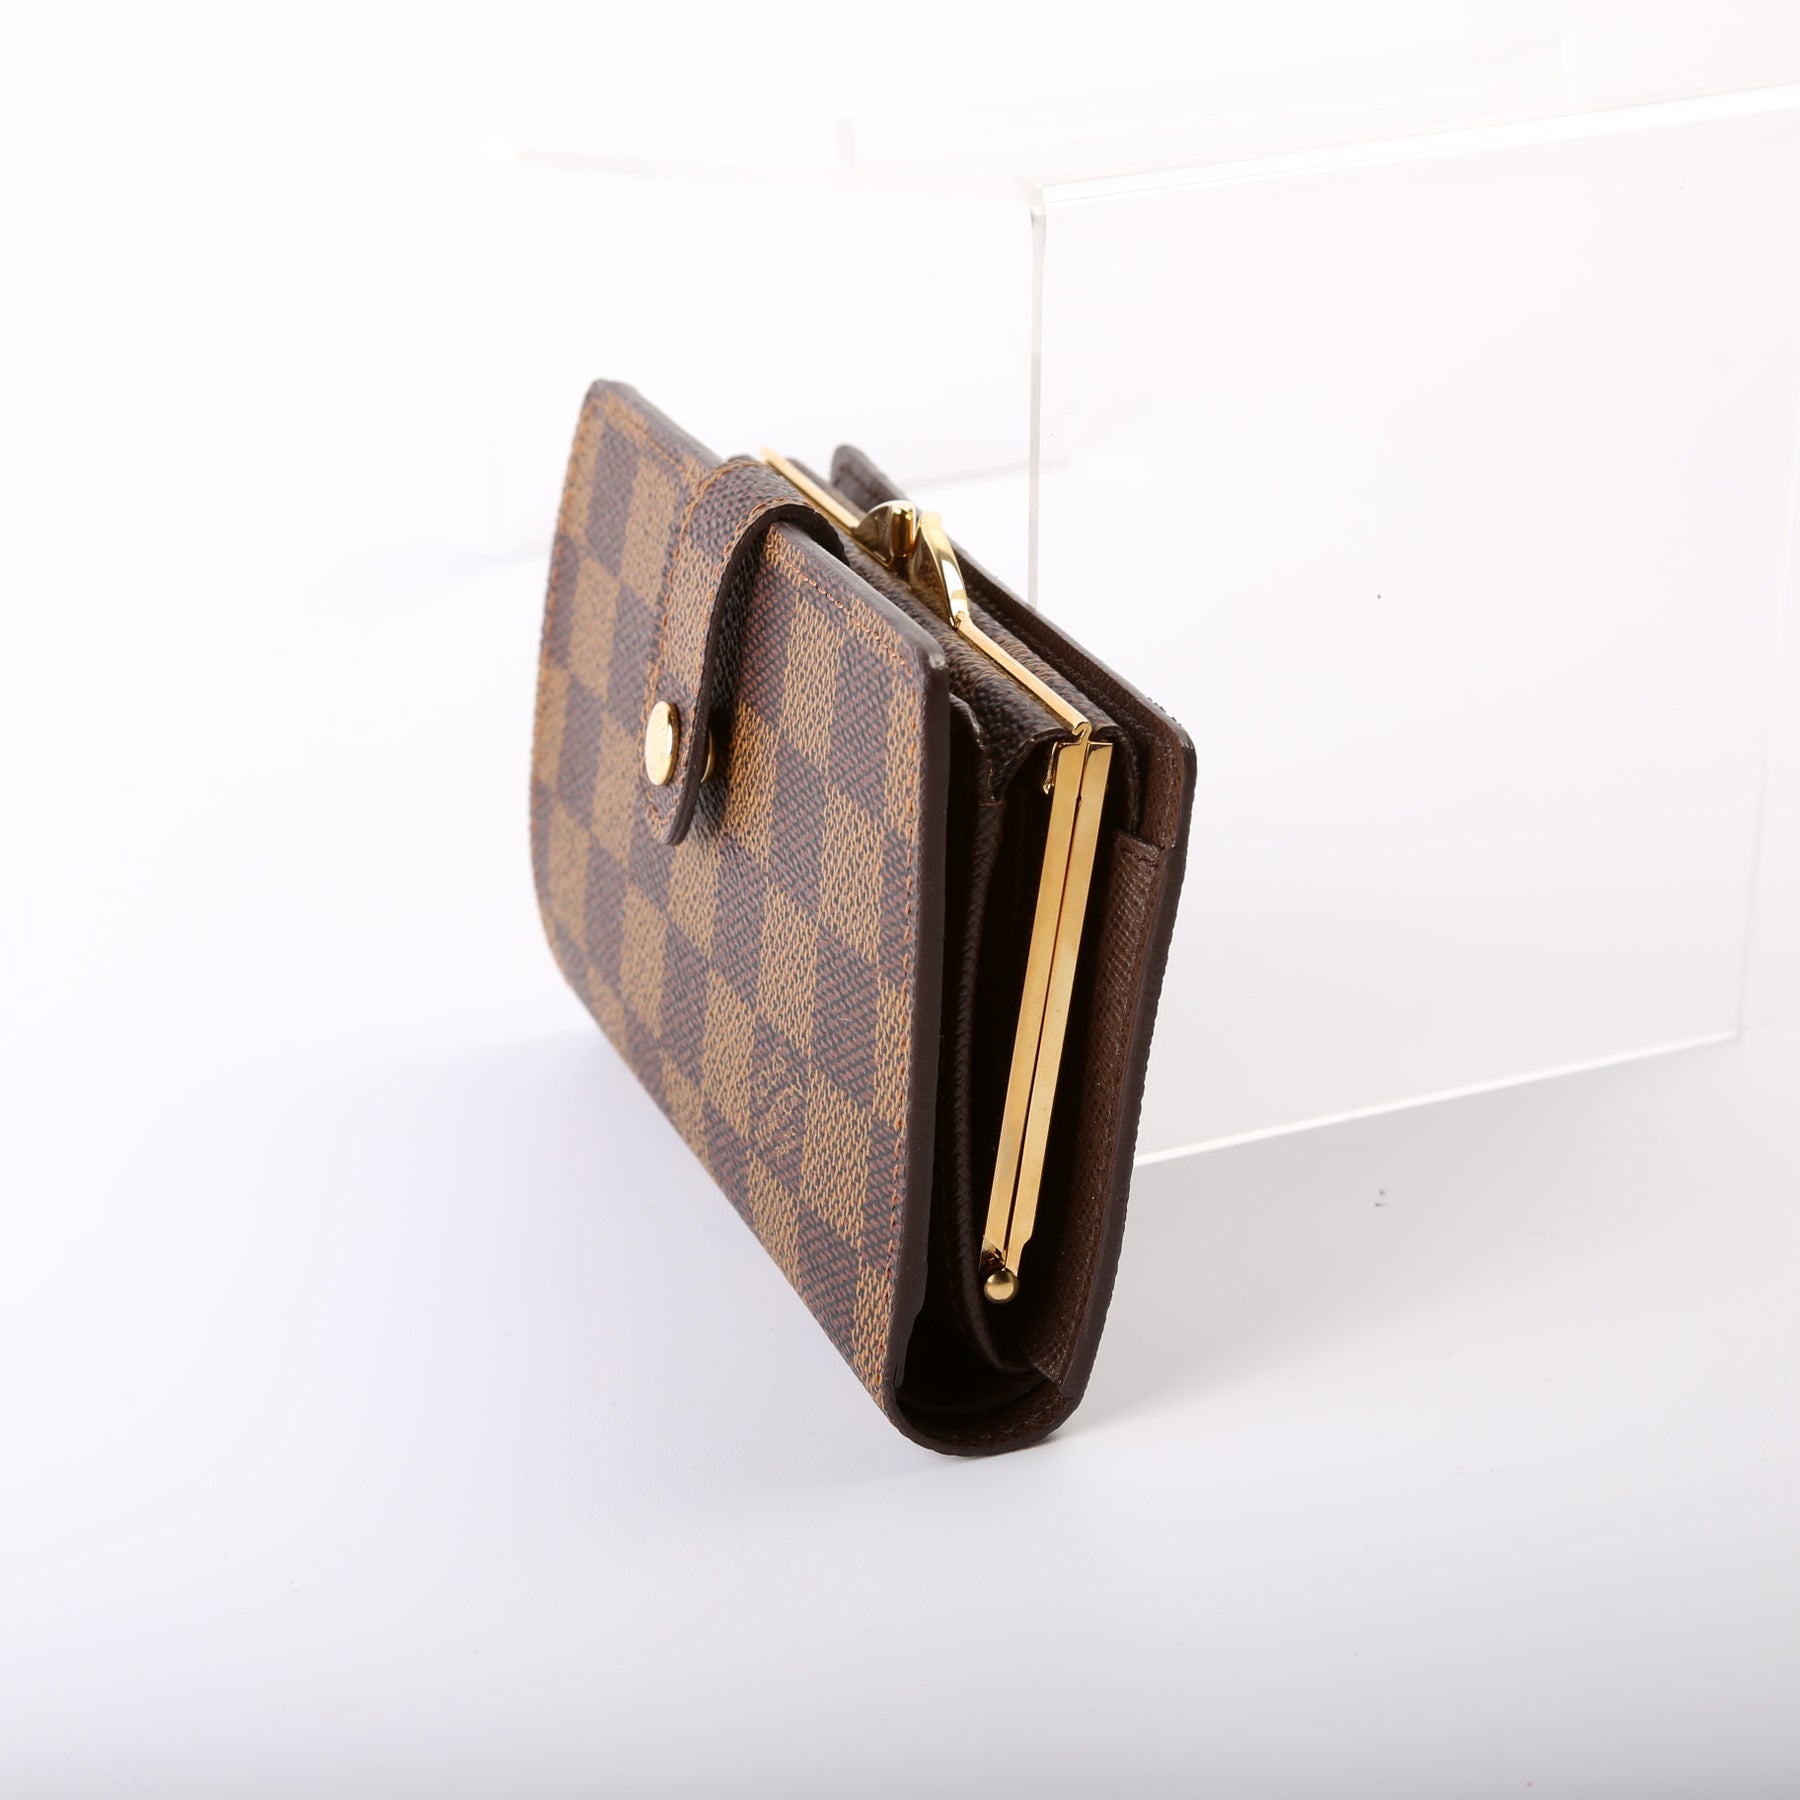 lv french purse wallet